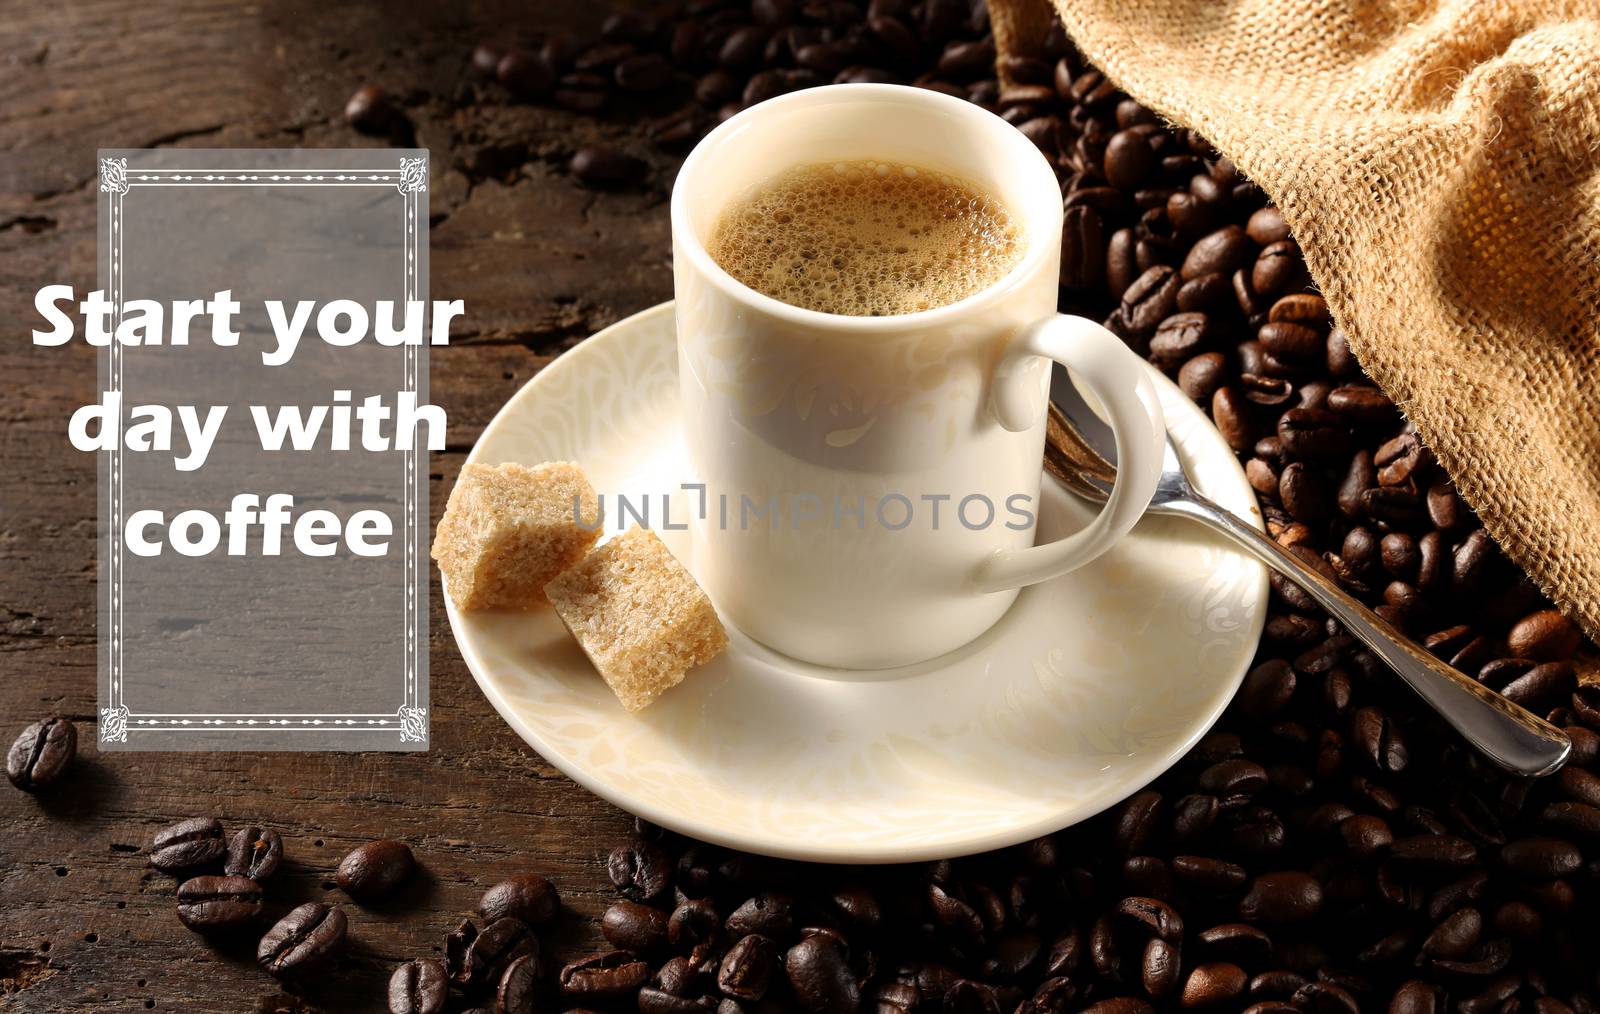 Inspiration life quote Start Your Day with Coffee, cup of coffee on antique wood background with coffee beans. Working from home, home office concept